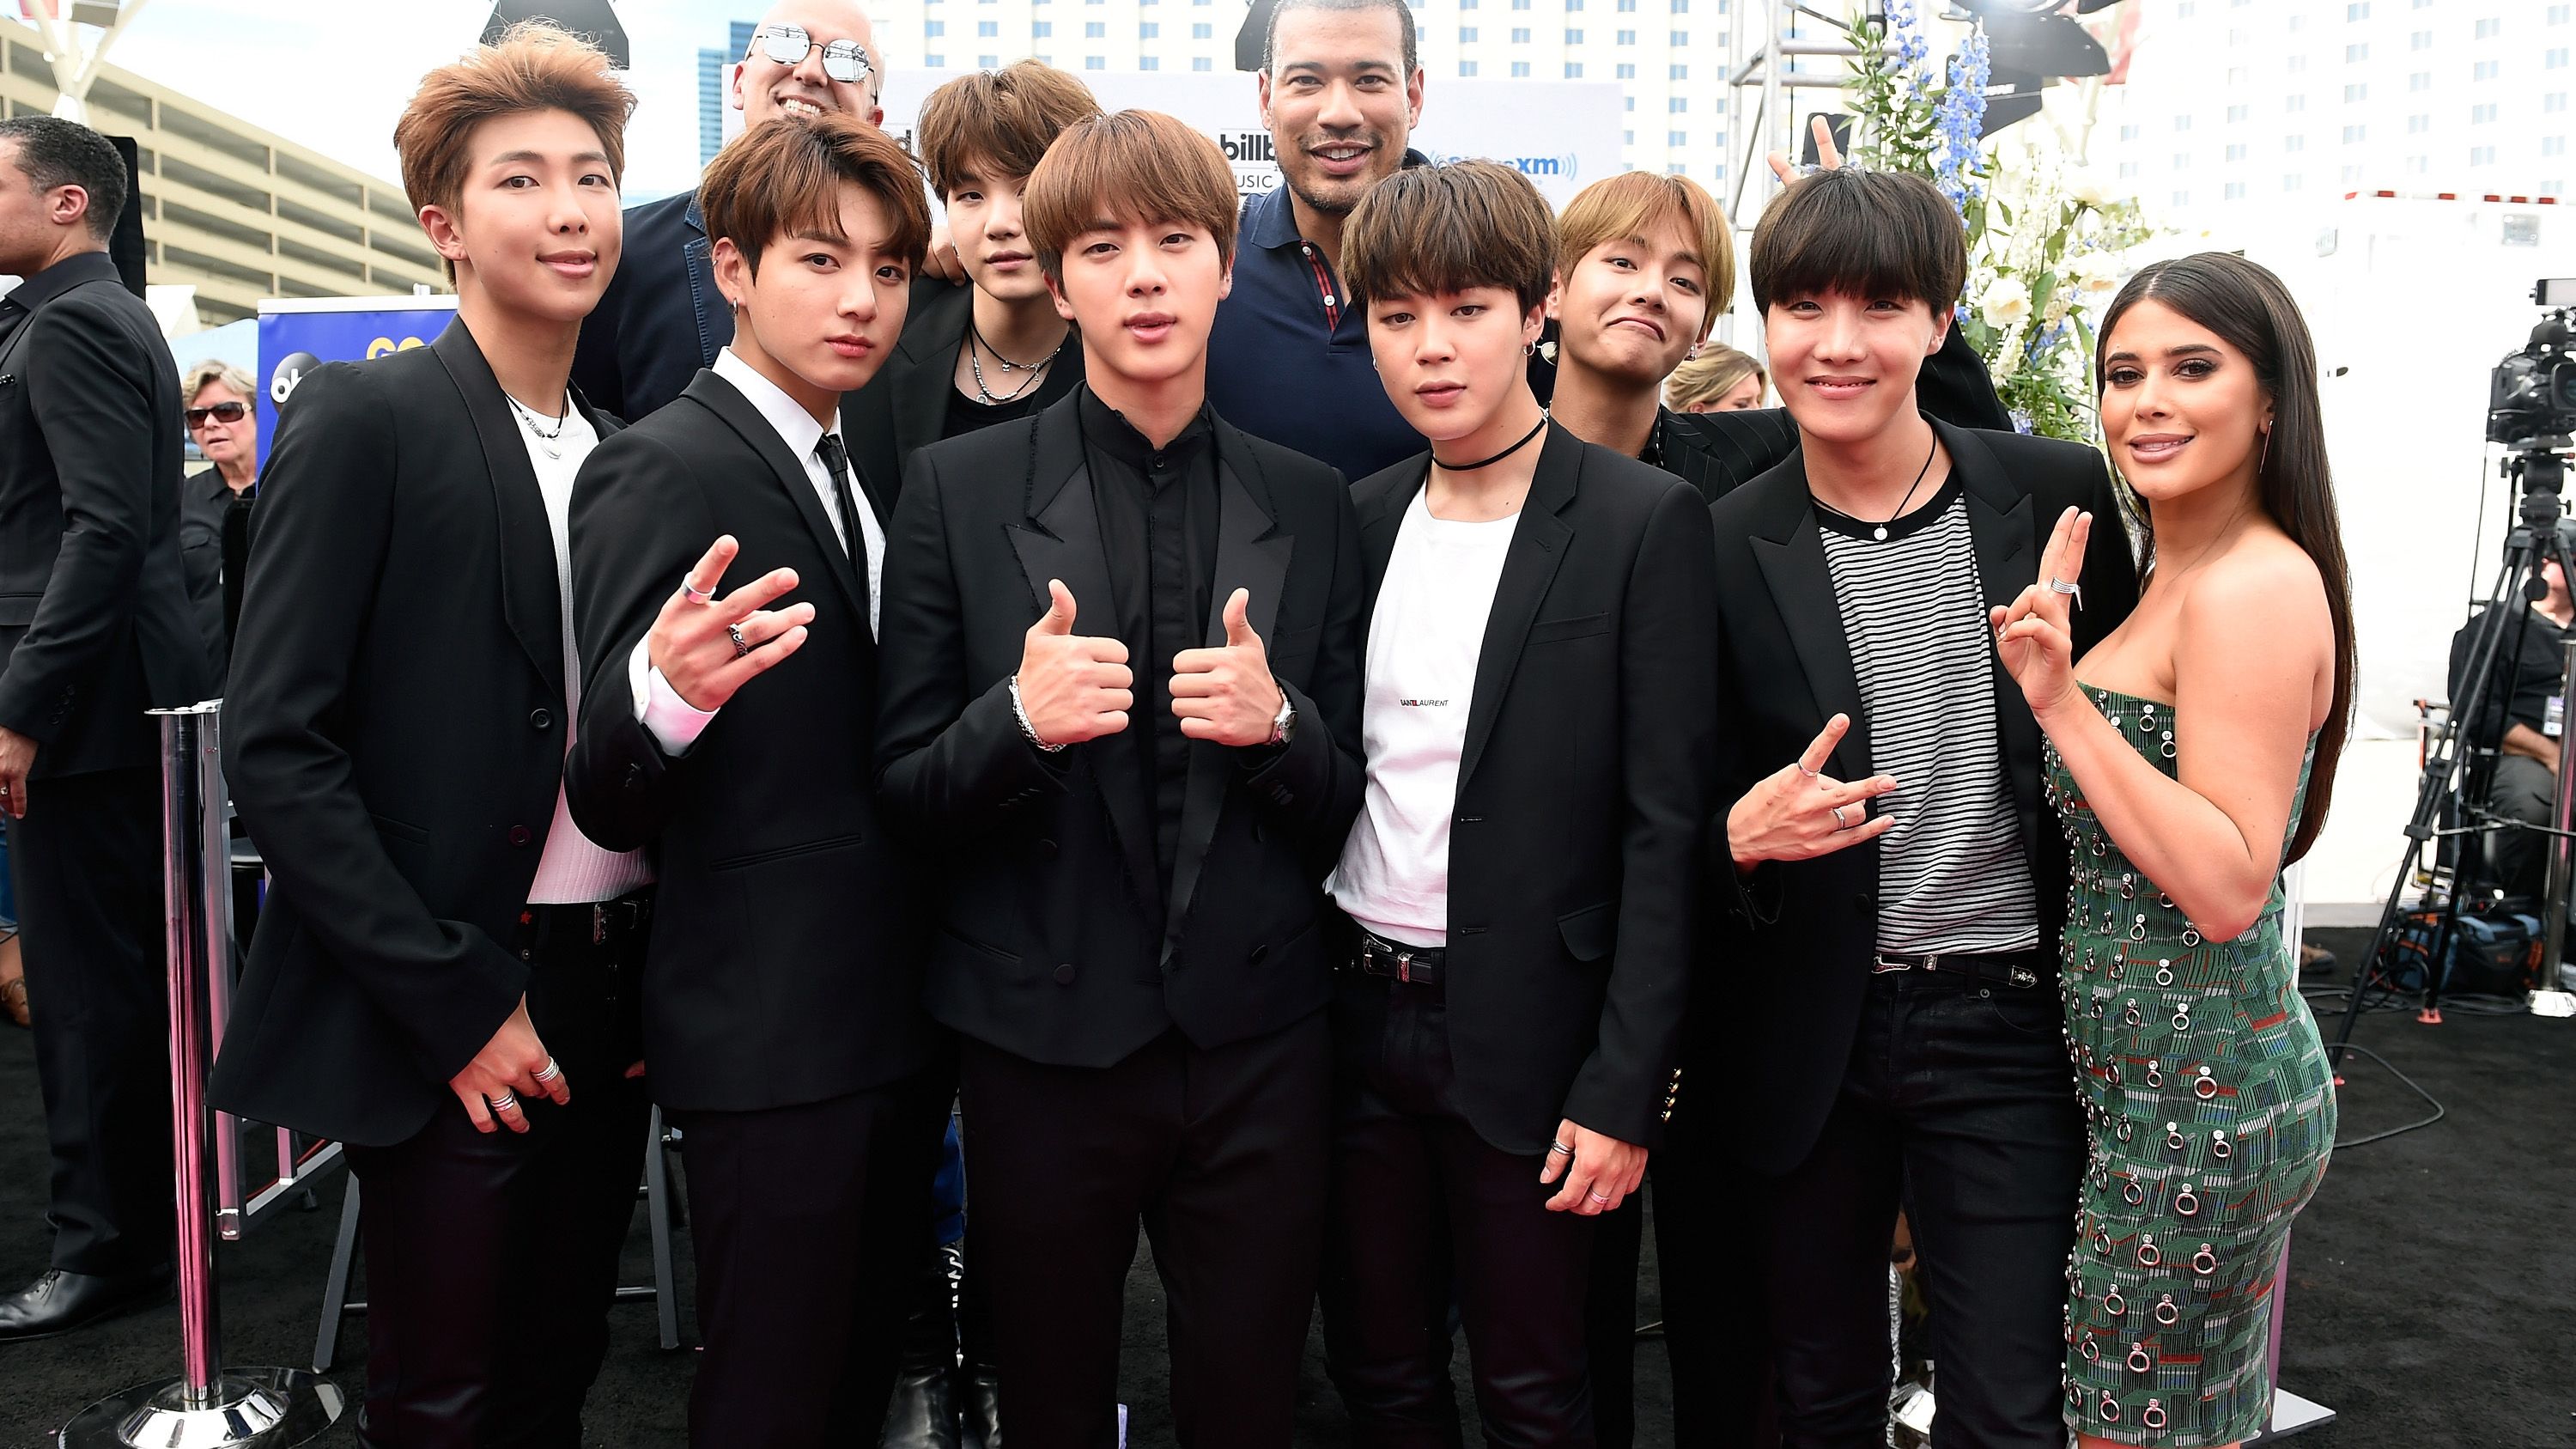 Bts Bangtan Boys Wallpaper Full HD Free Download Picture With Fans